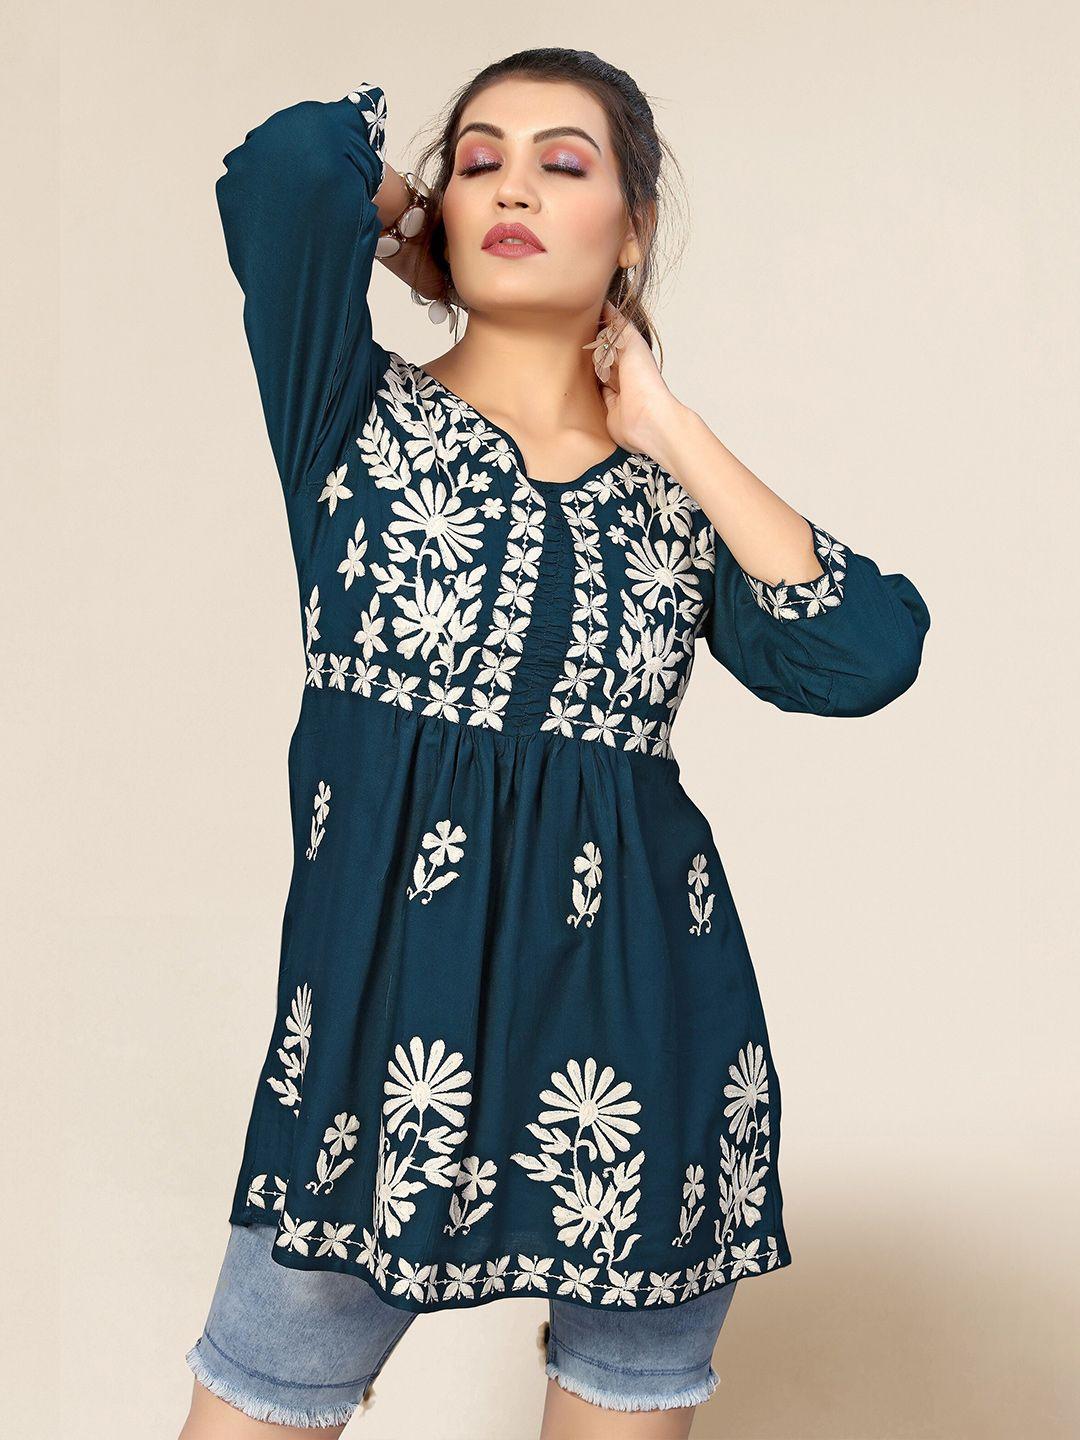 Winza Designer Women Blue Floral Embroidered Top